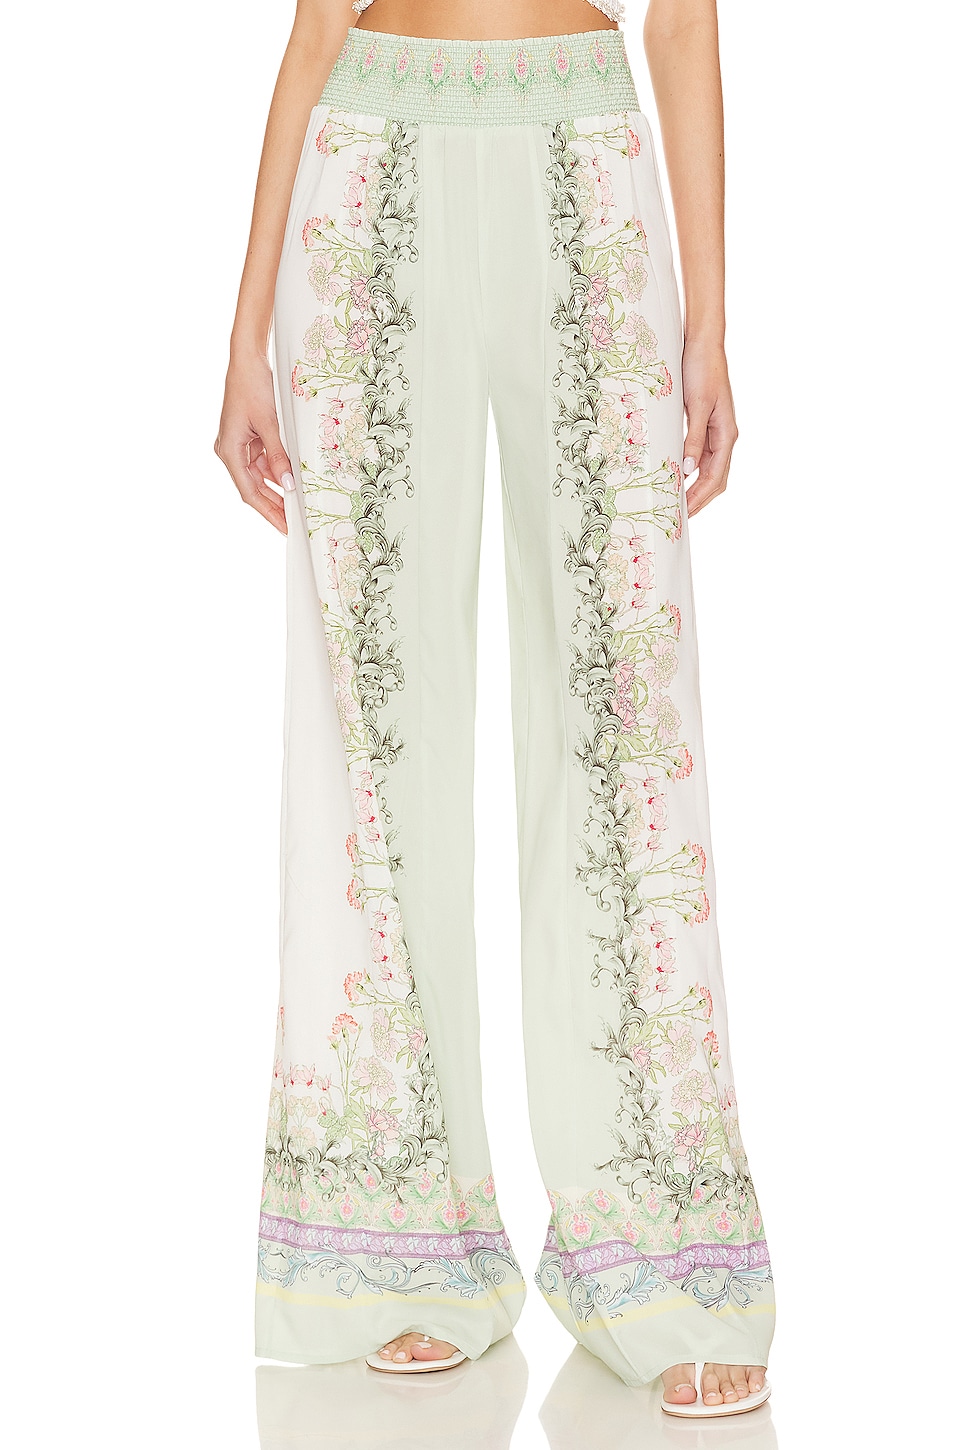 Alice + Olivia Alabama Palazzo Pan in Floral Fest